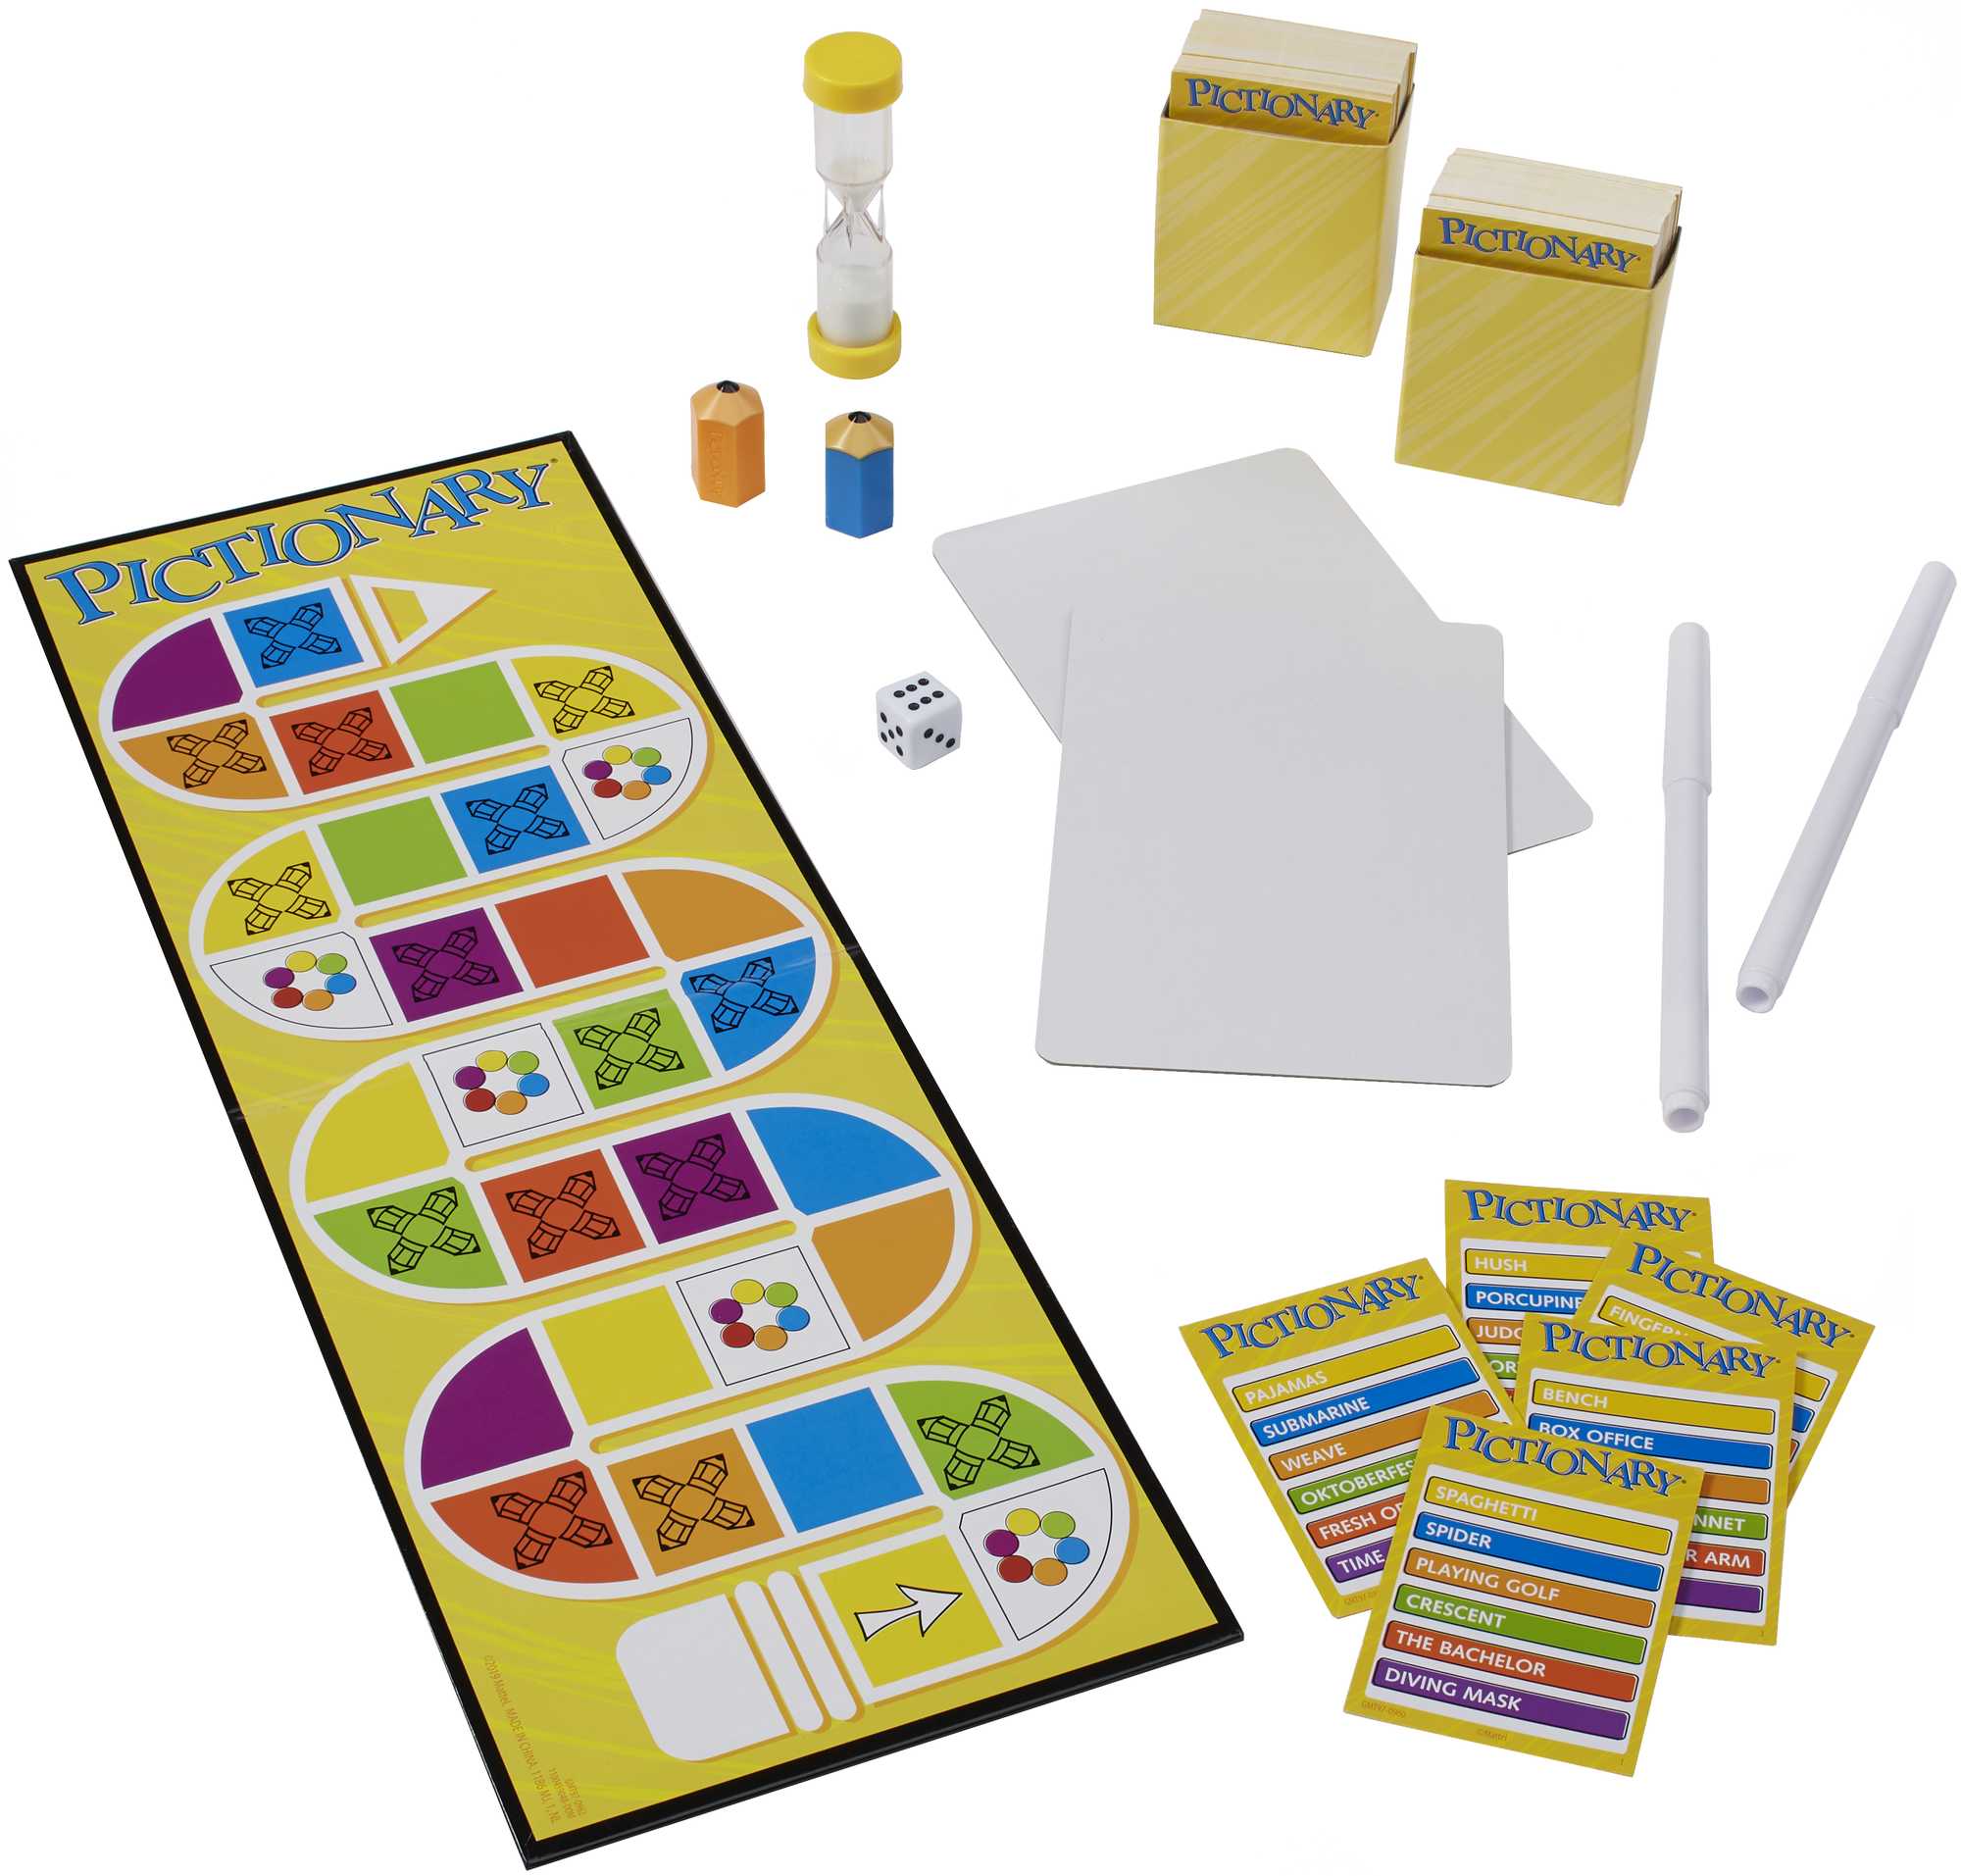  Mattel Games Pictionary Air Drawing Game, Family Game with  Light-up Pen and Clue Cards, Links to Smart Devices, Makes a Great Toy for  8 Year Olds and up ( Exclusive) 